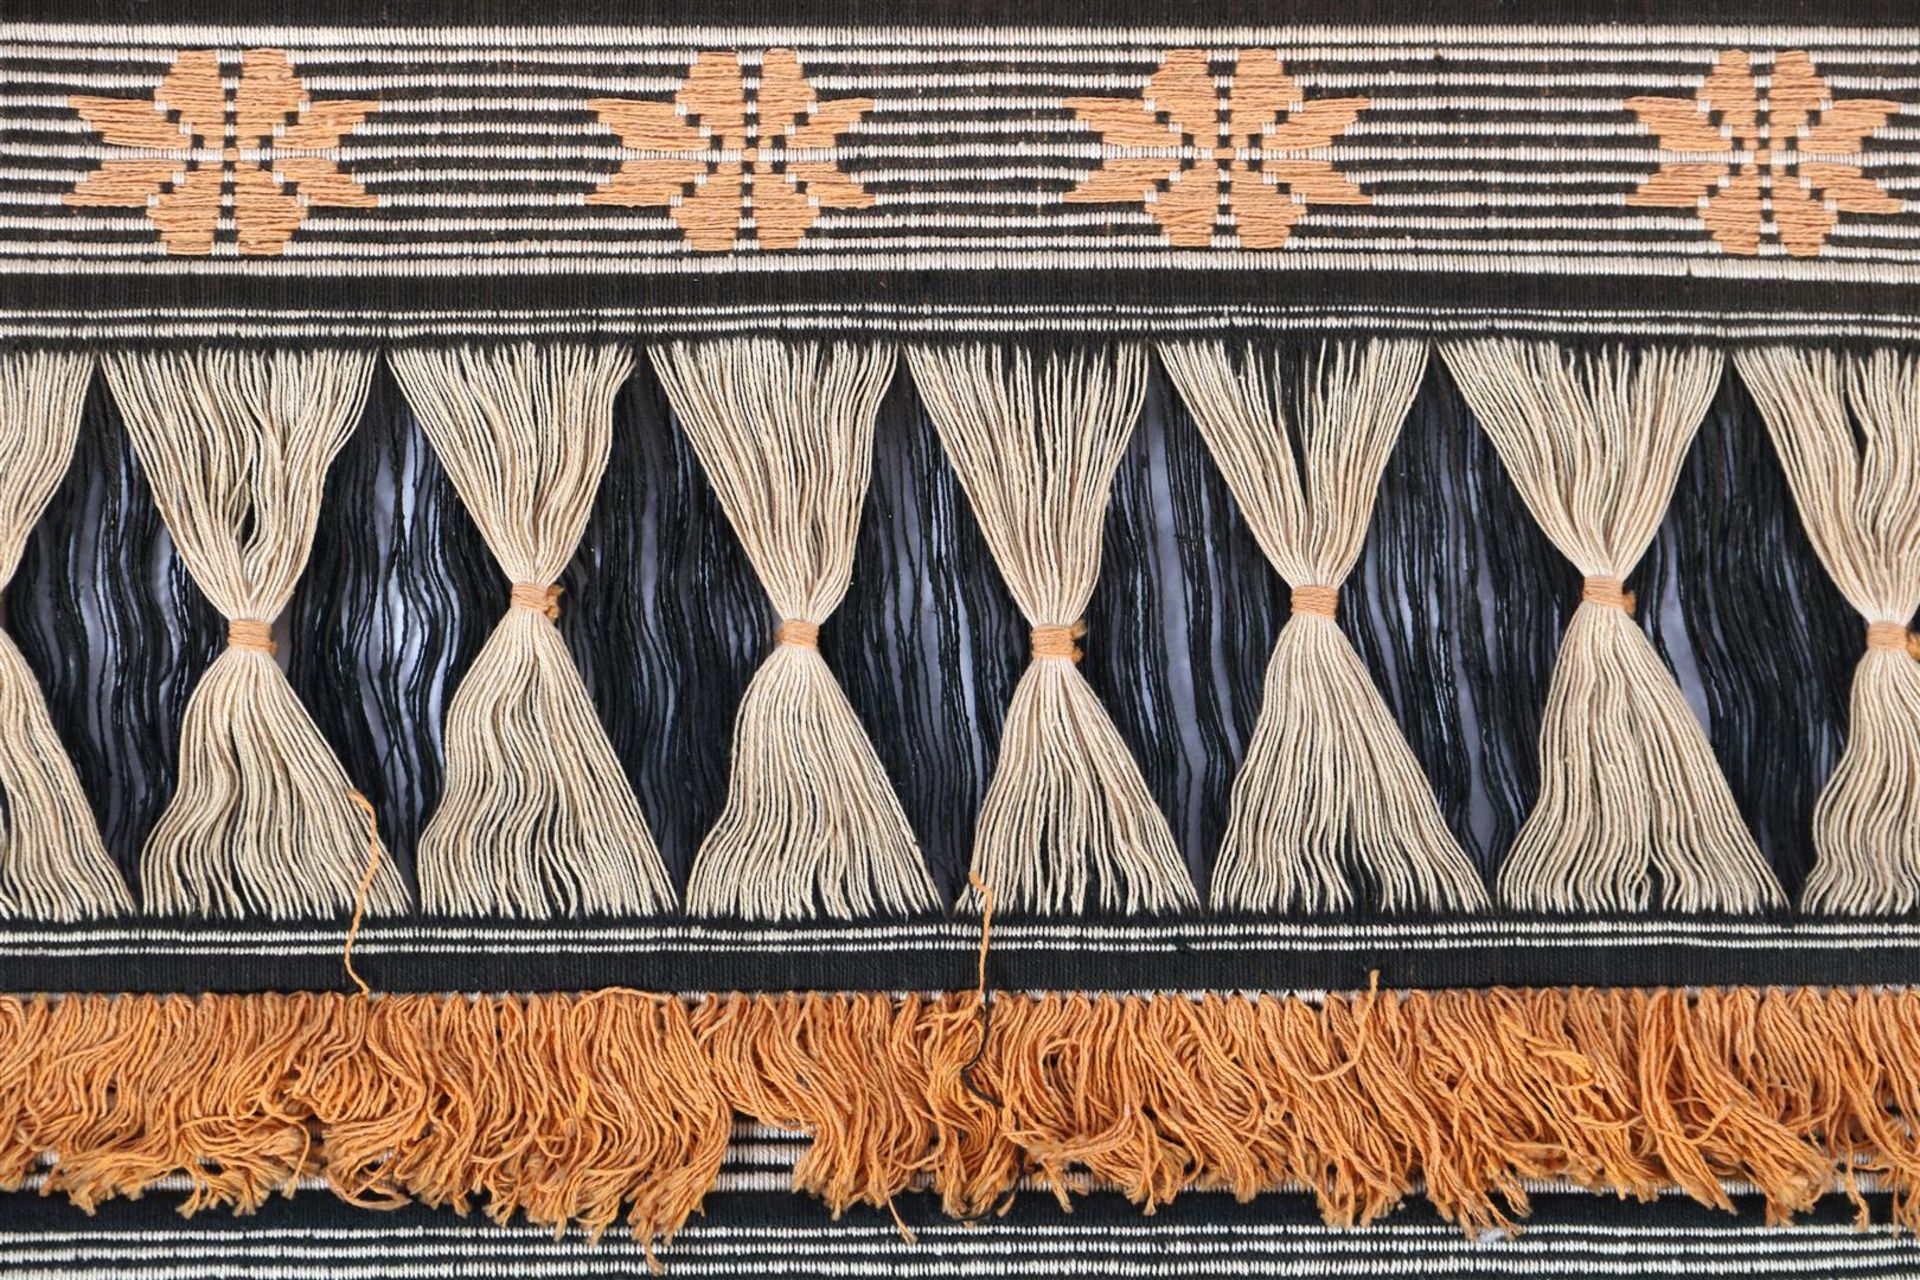 Woven textile wall decoration - Image 3 of 3